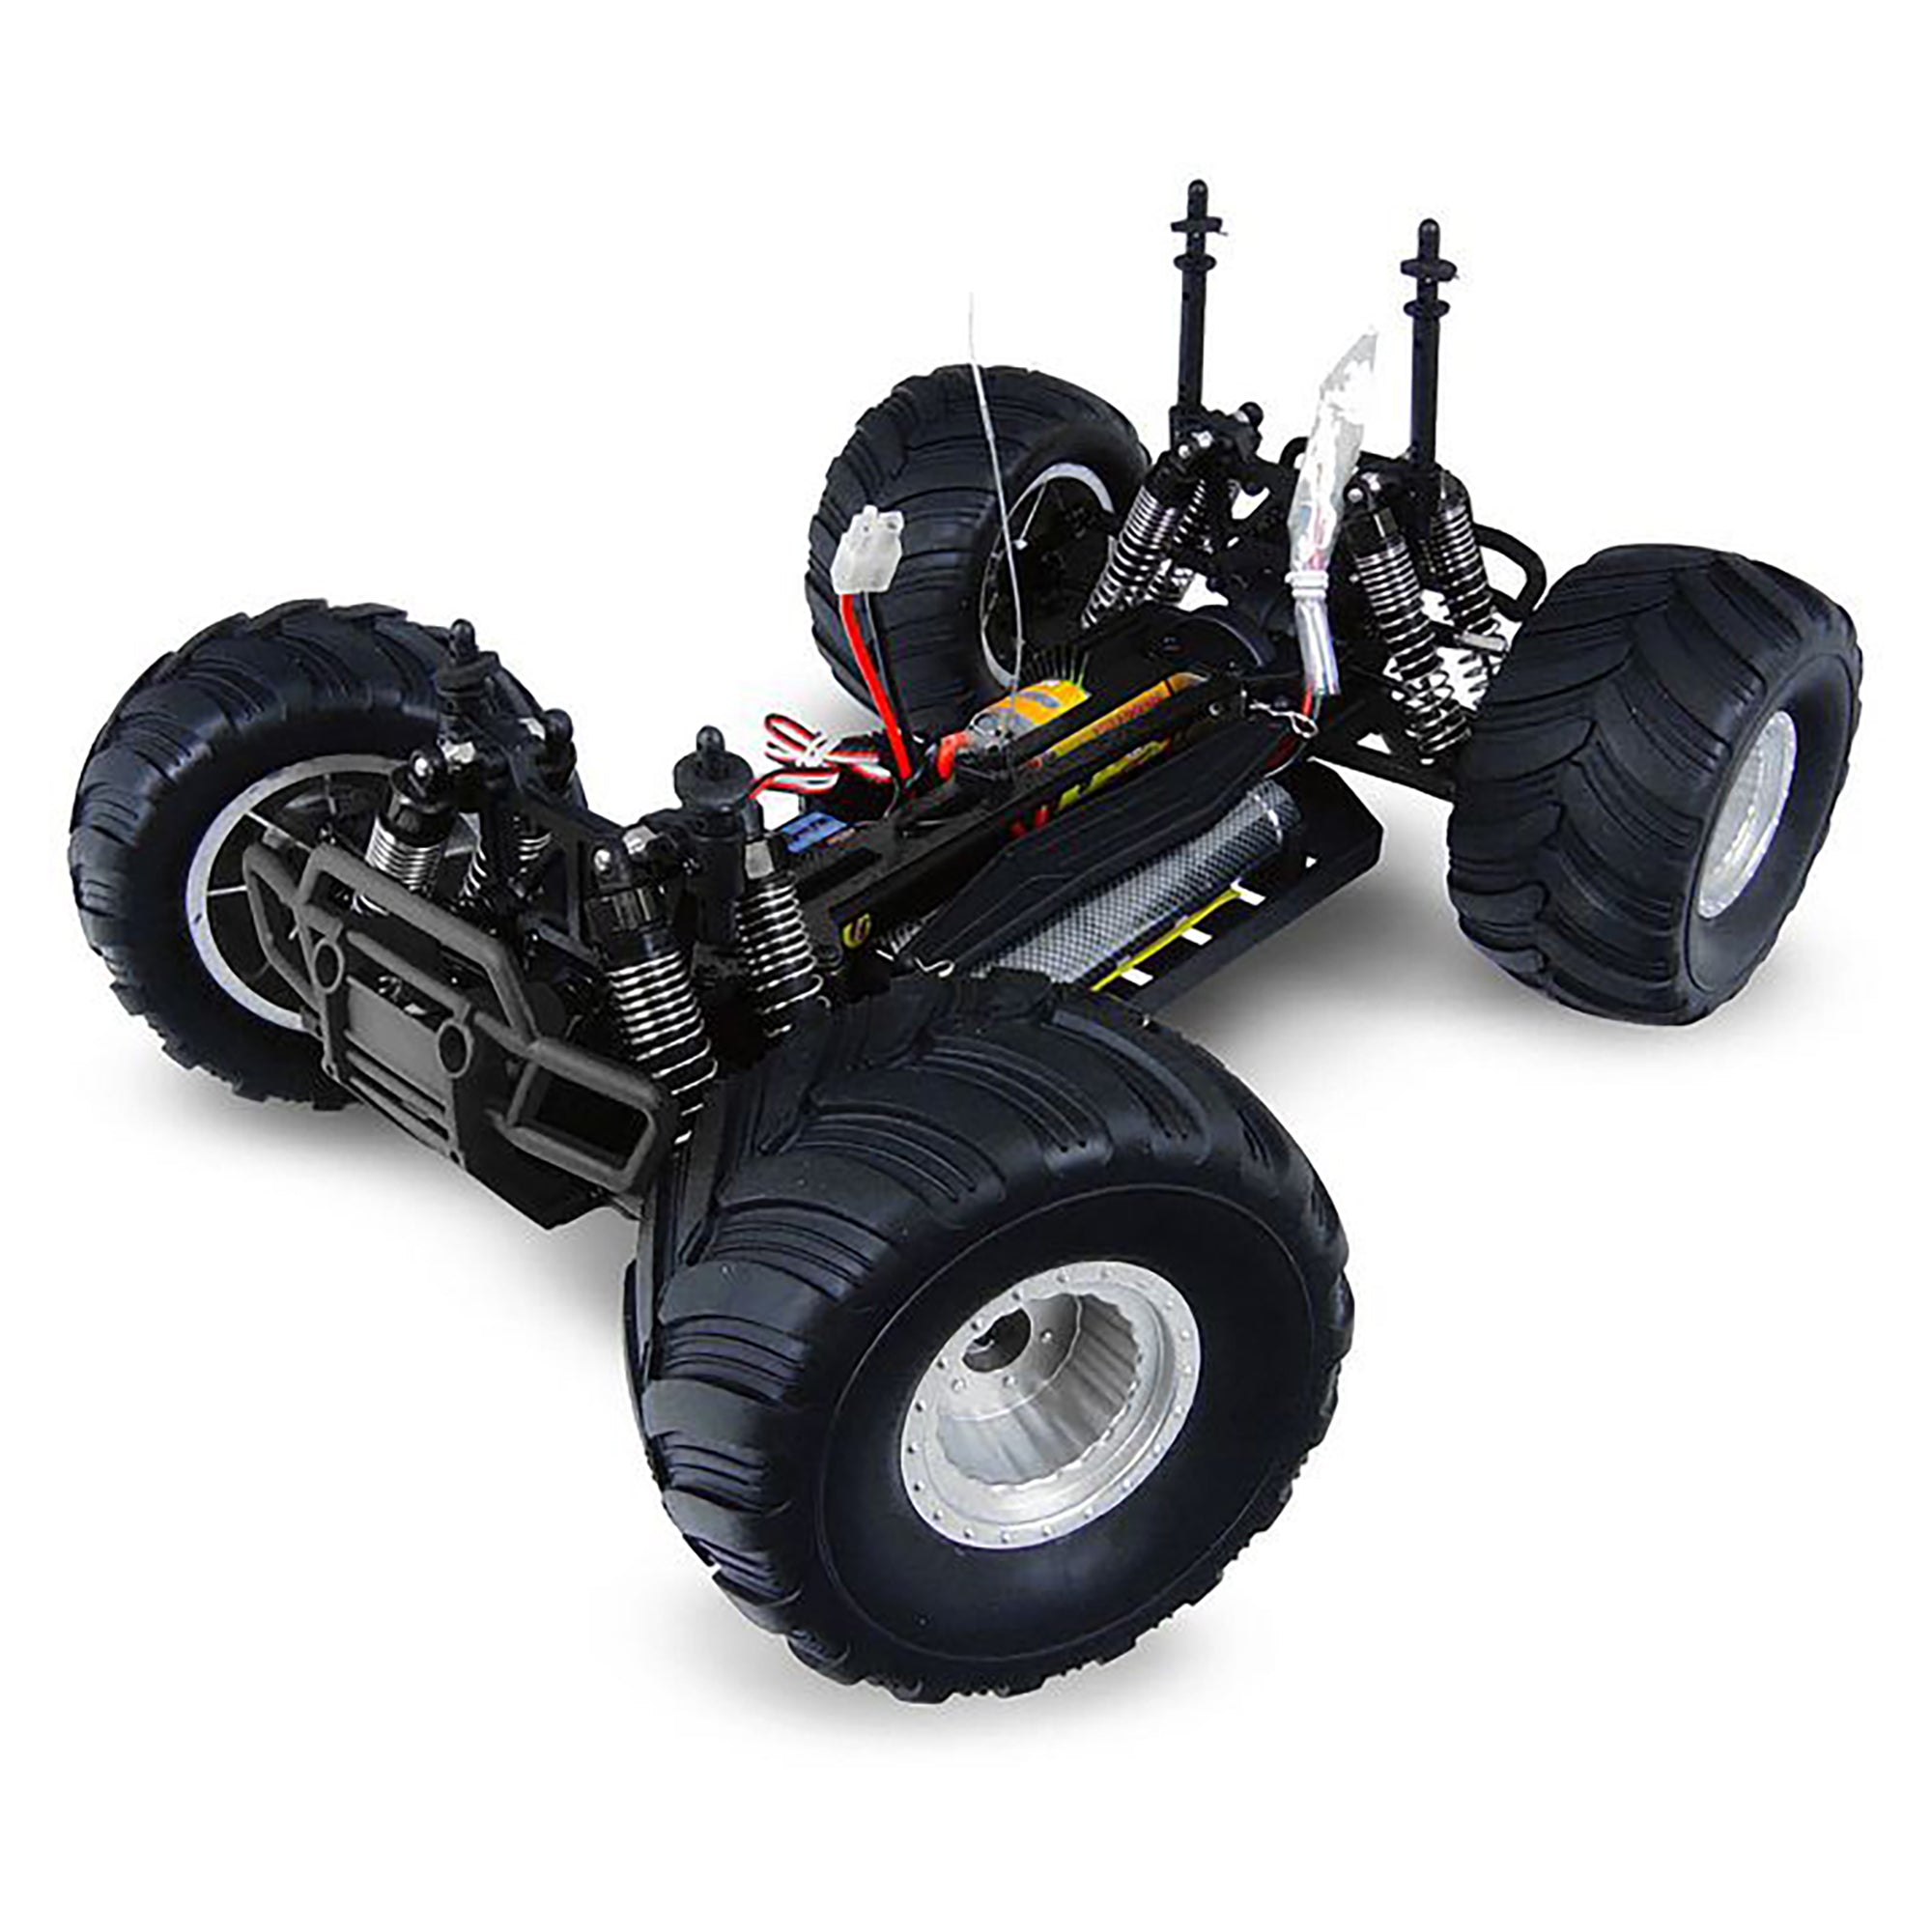 HSP Racing 94111-88043 2.4Ghz Electric 4WD Off Road 1/10 Scale RC Monster Truck